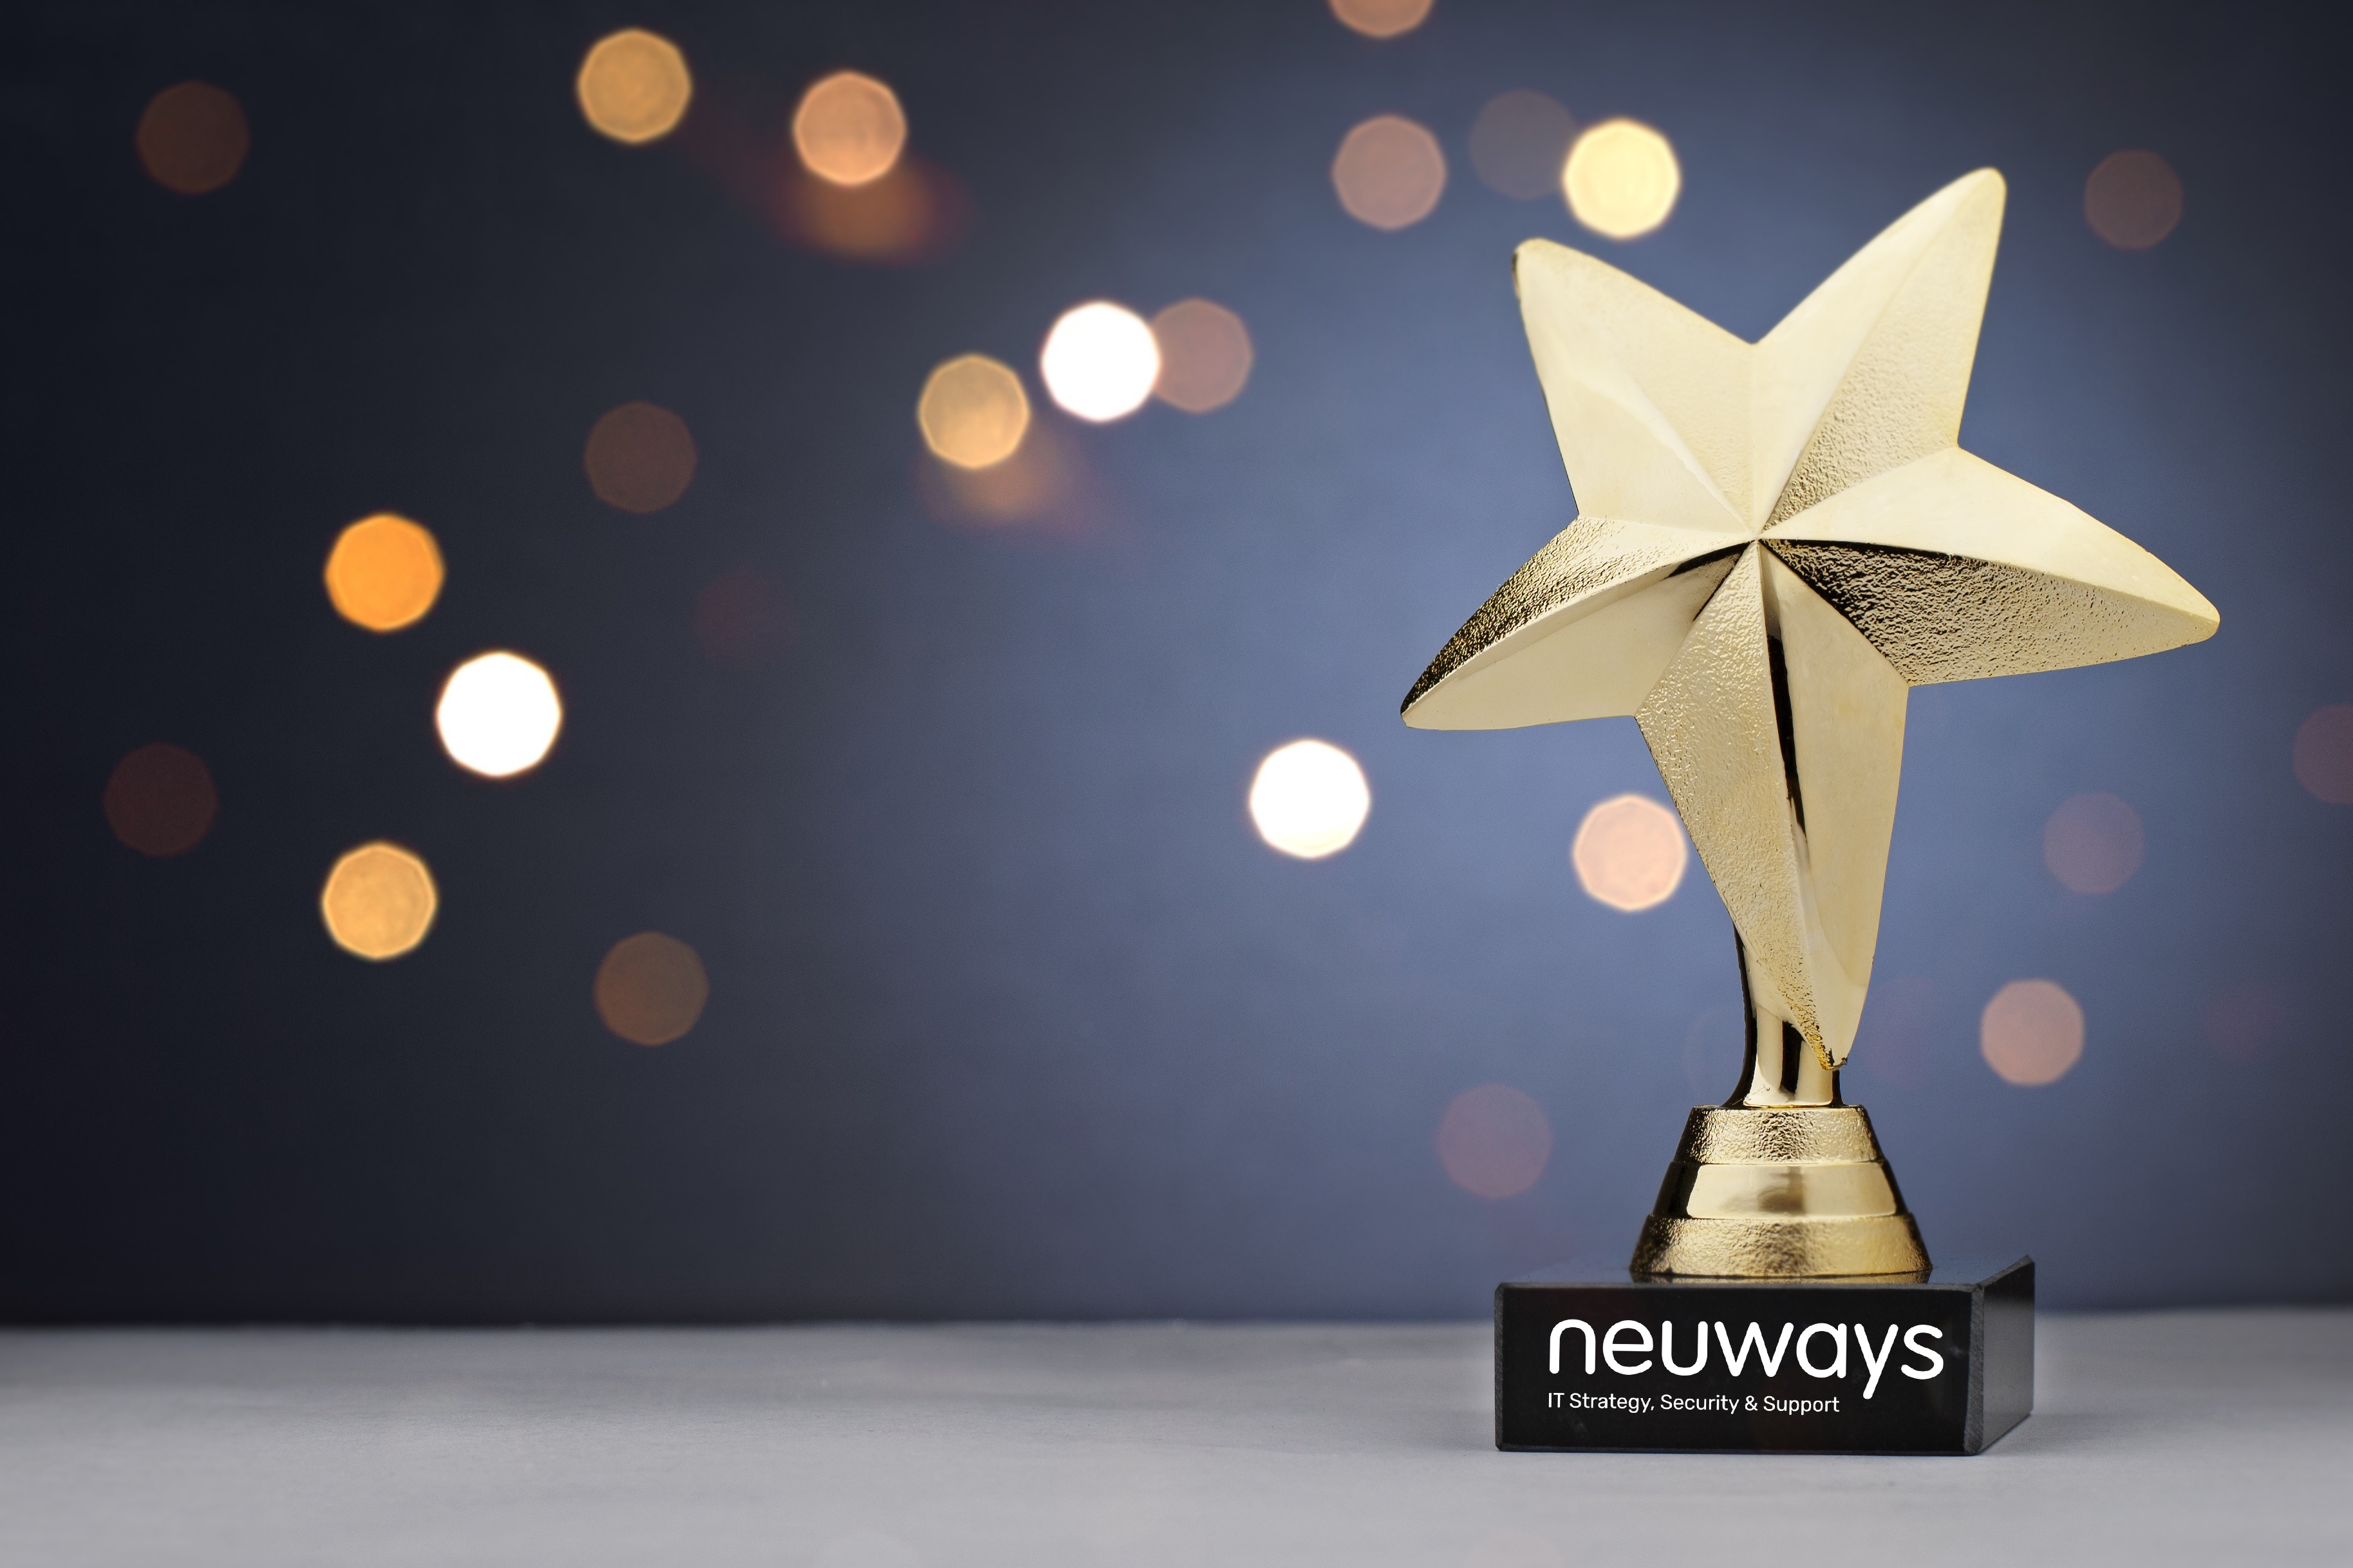 Neuways wins “Innovative MSP of the Year” Featured Image